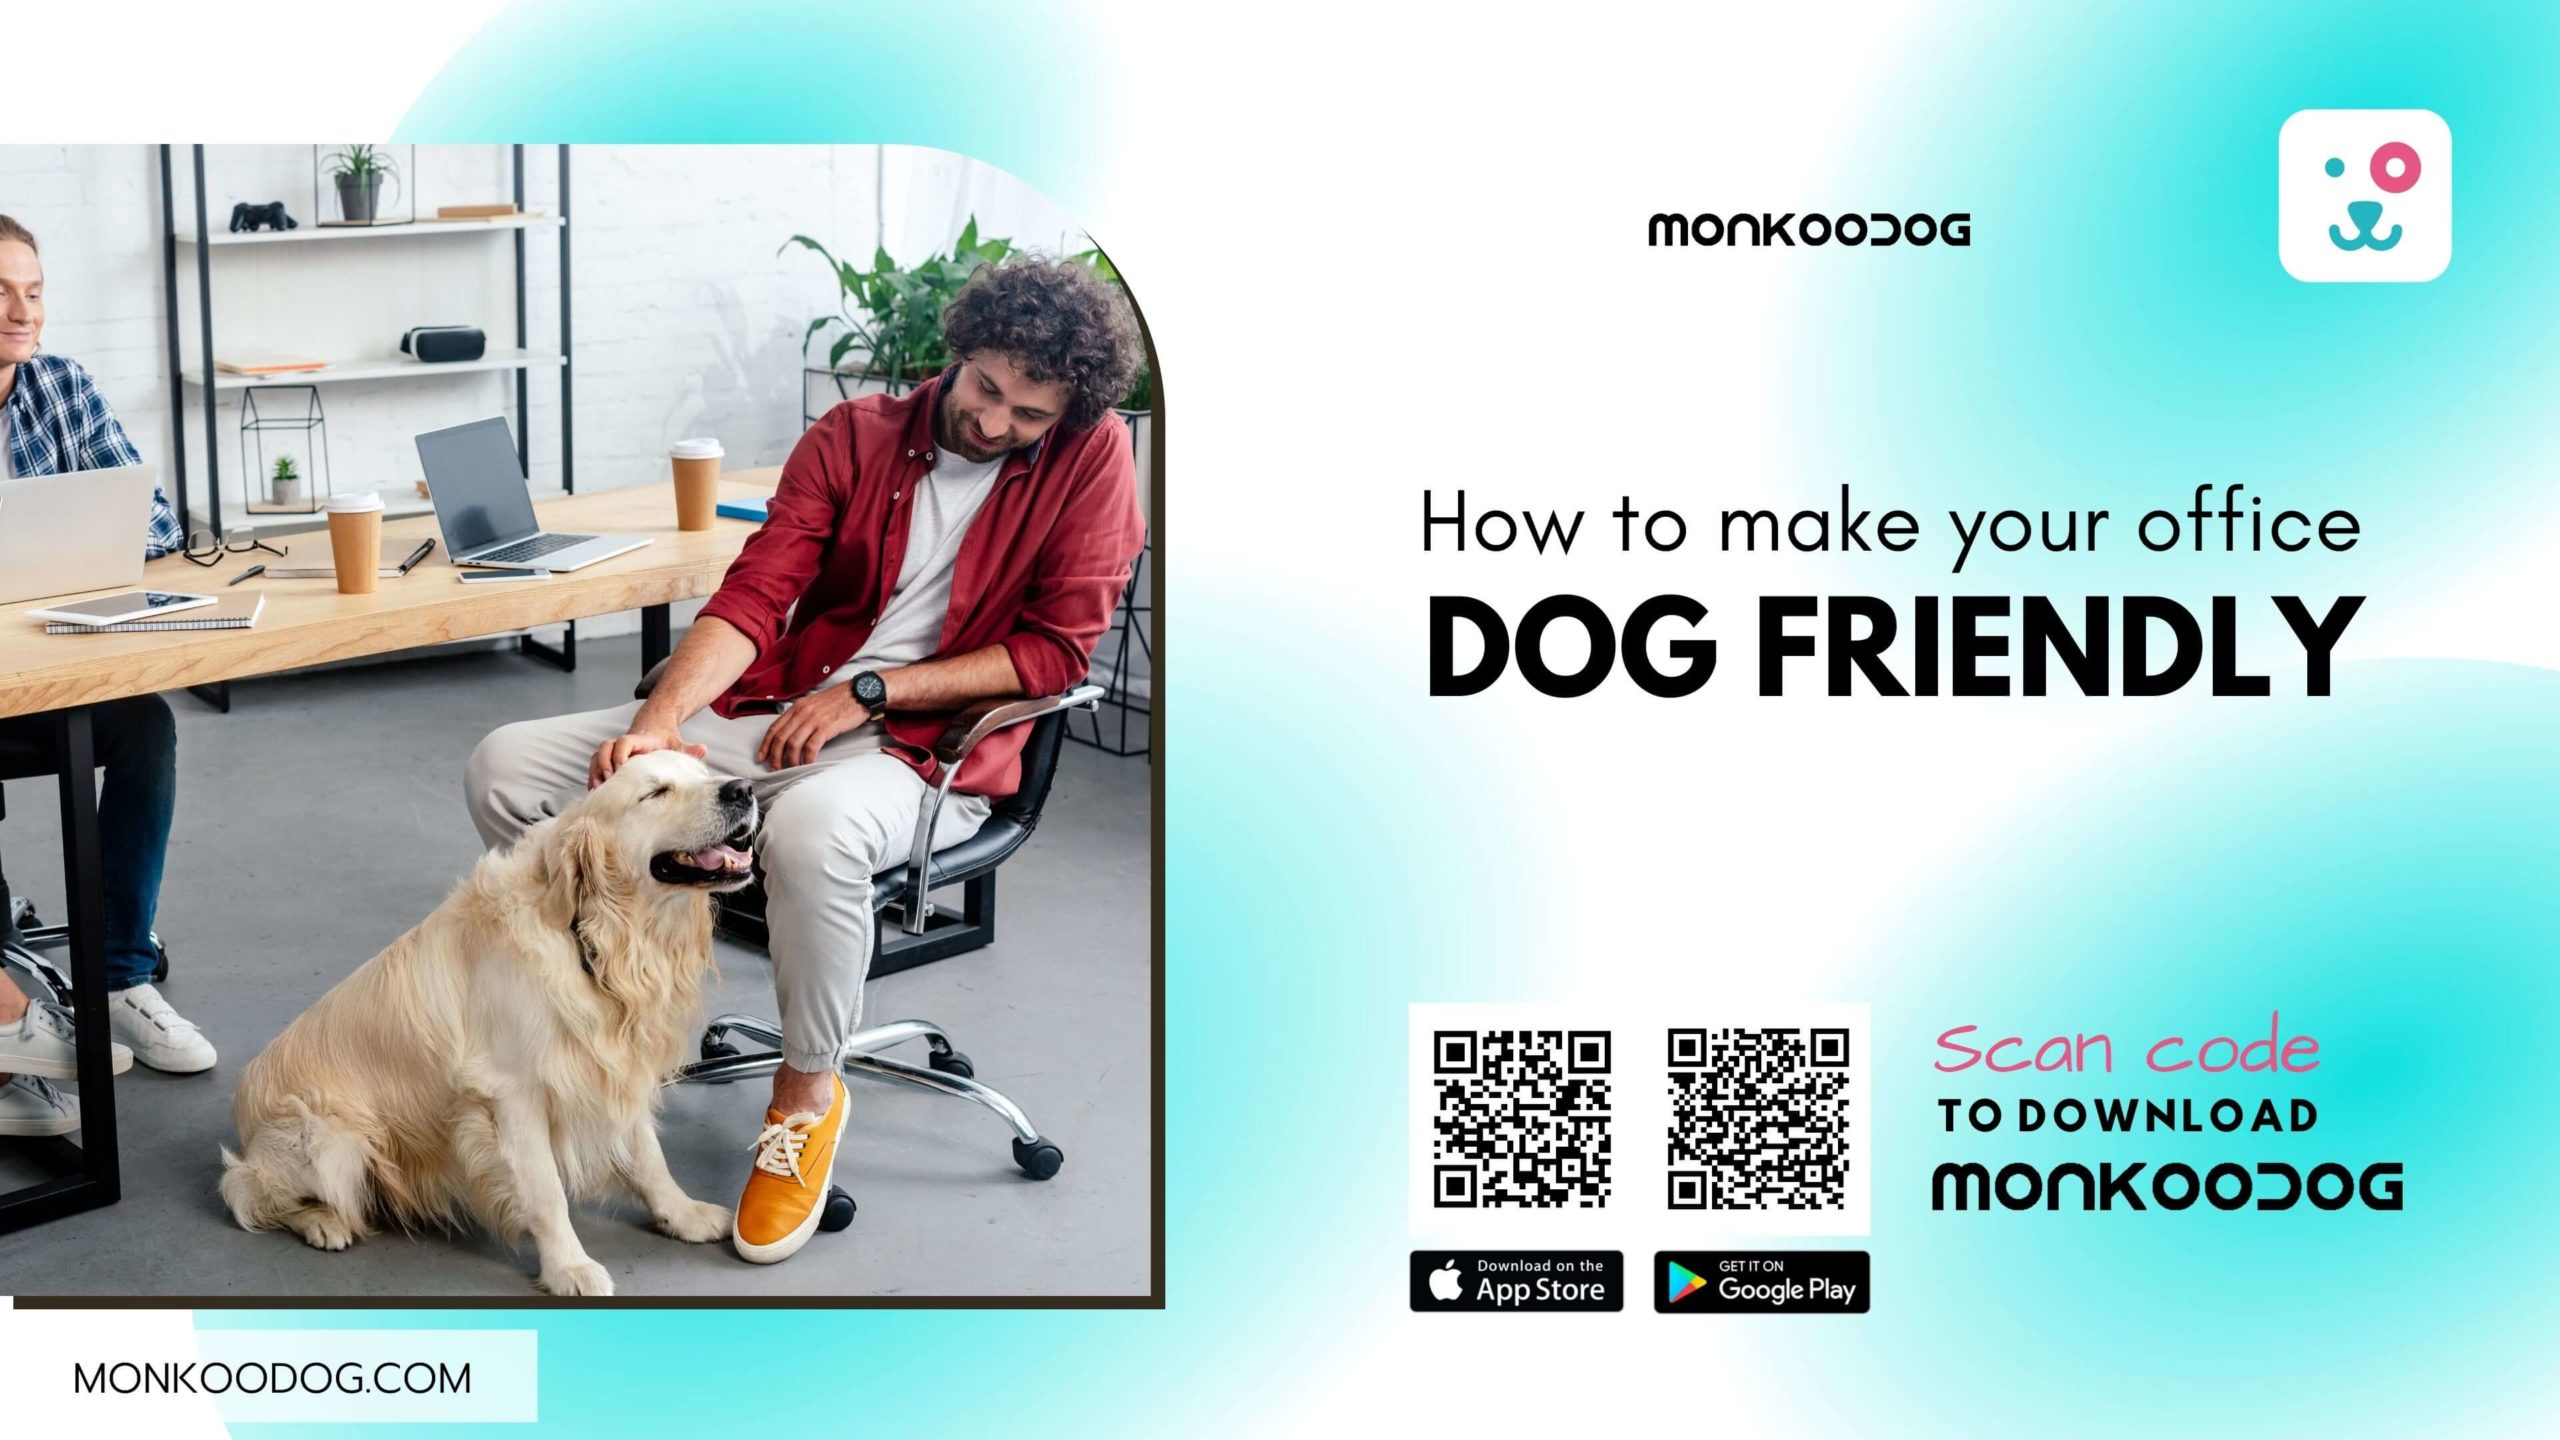 How to make your office dog friendly